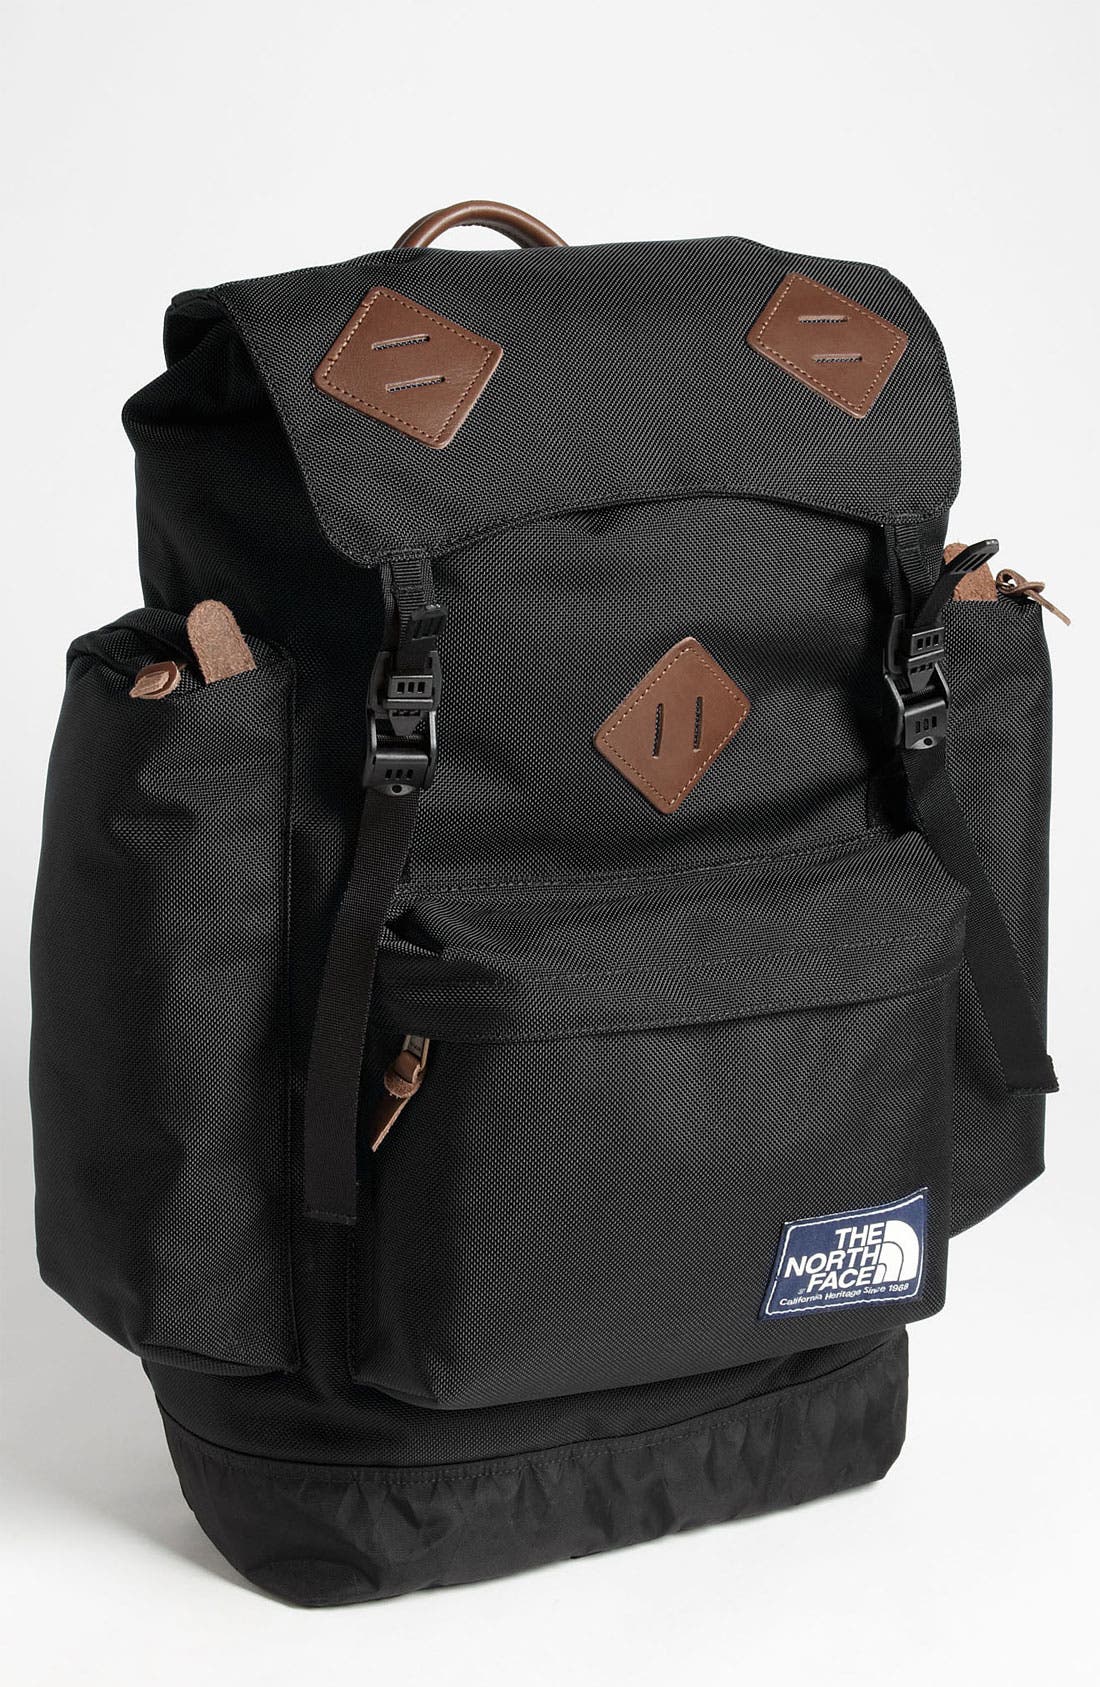 The North Face 'Mountain Heritage 